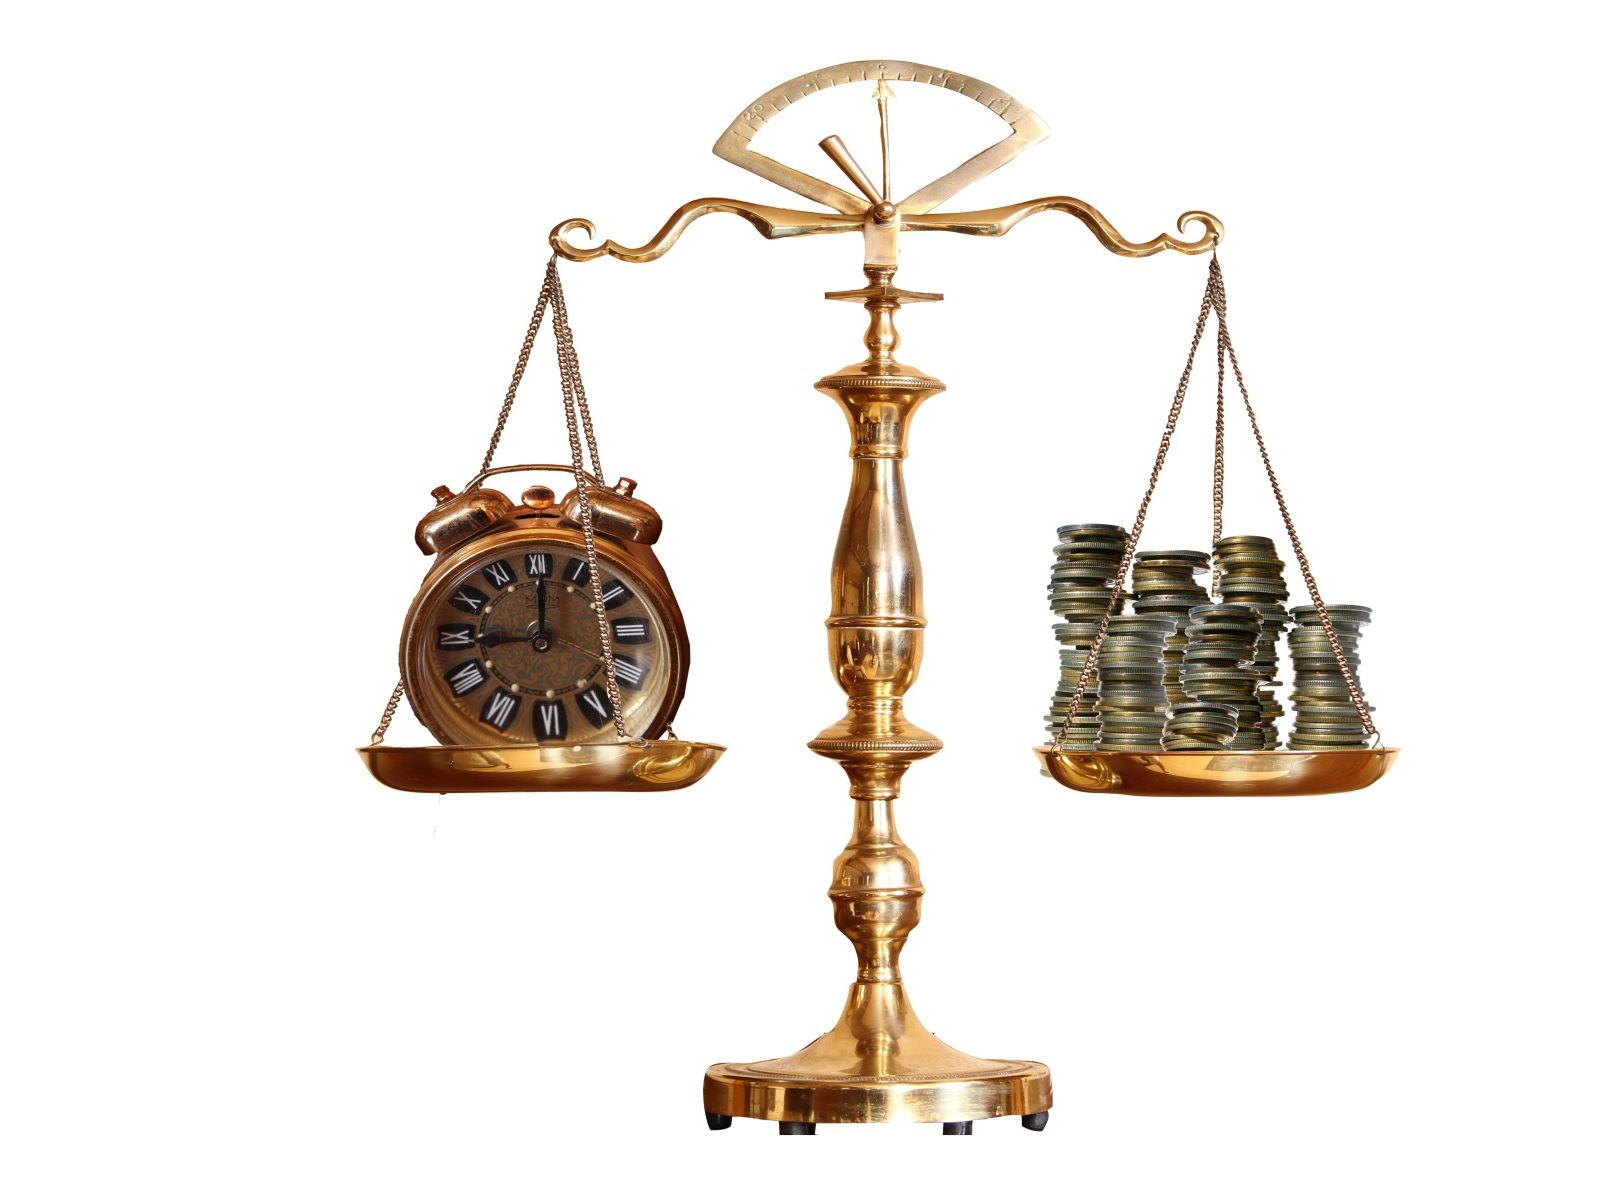 Scales with a clock and coins on the bowls